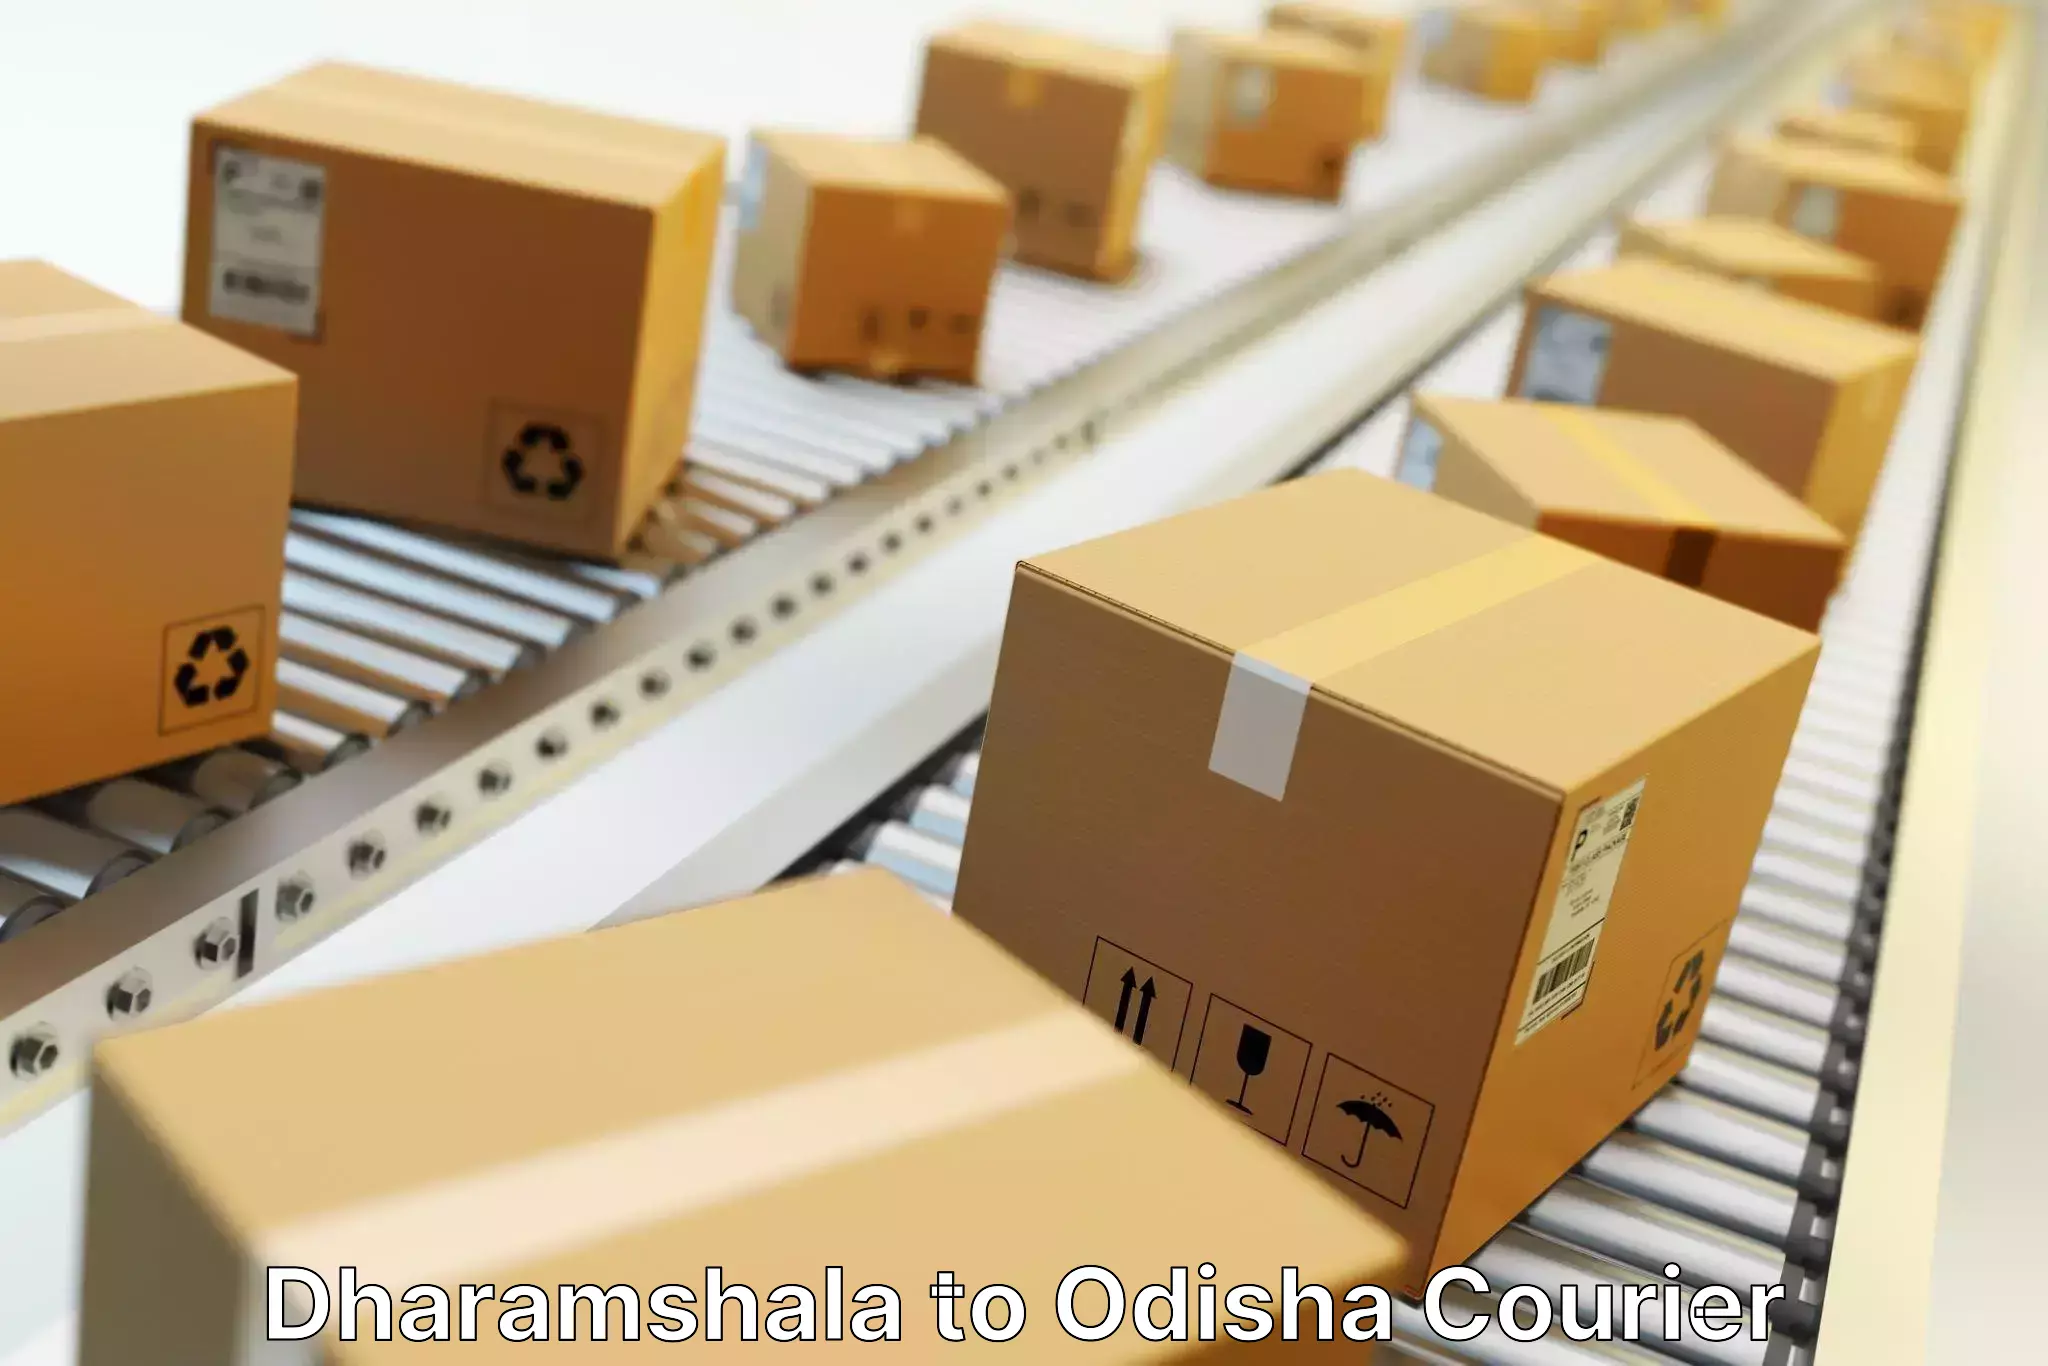 Secure shipping methods Dharamshala to Chandinchowk